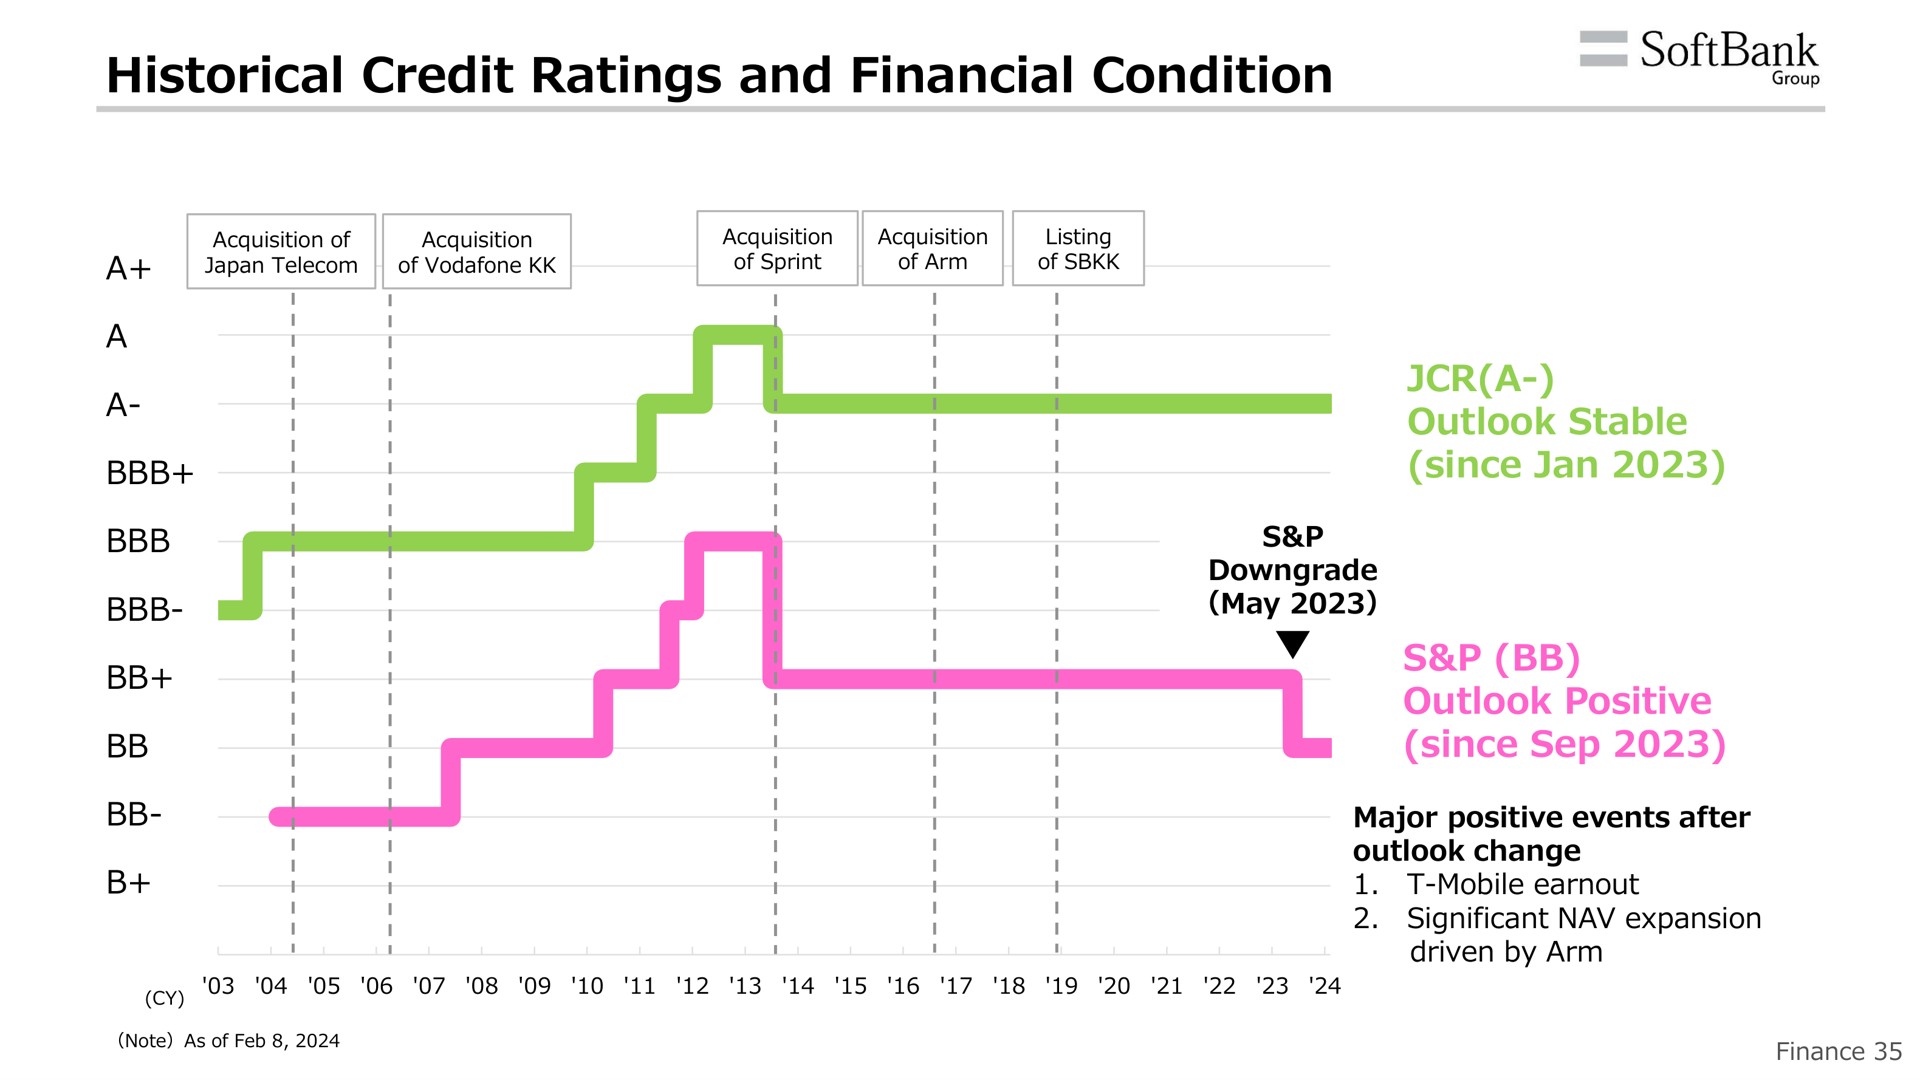 historical credit ratings and financial condition group | SoftBank